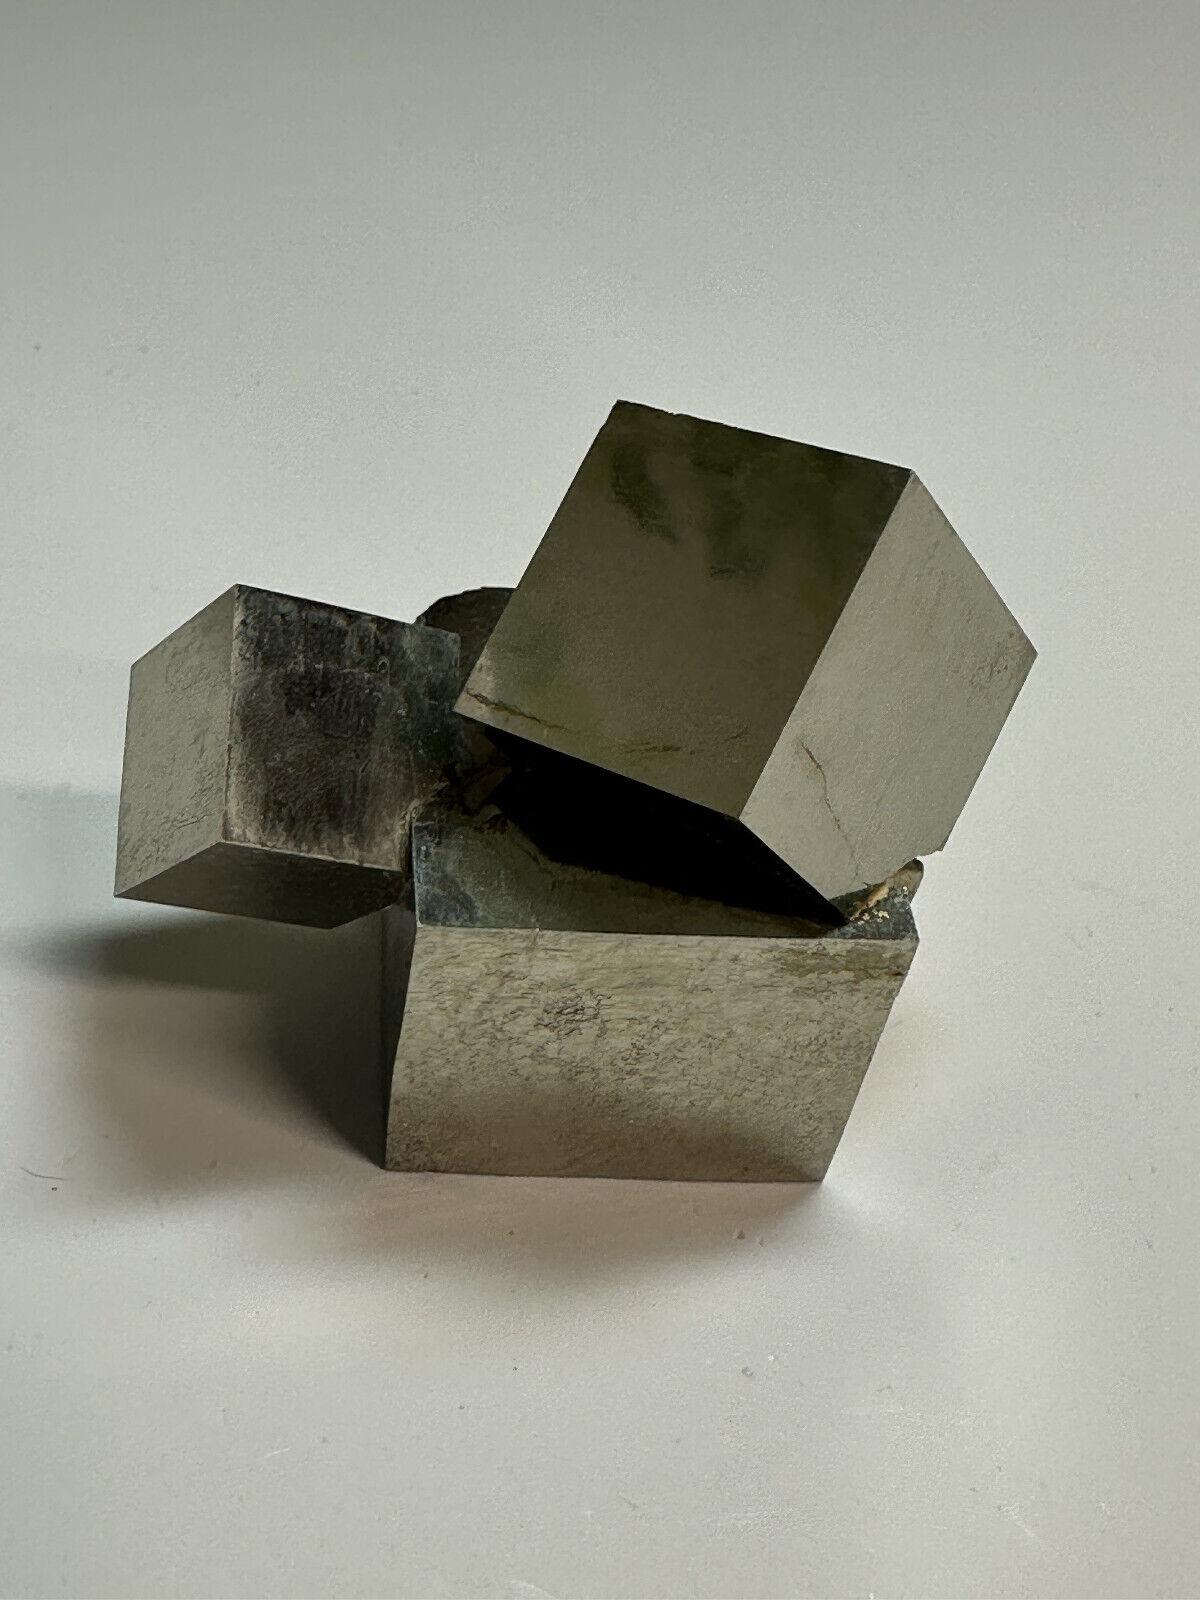 3 cubes__LARGE Lusterous Entwined Interlocking Pyrite Cube Cluster_Spain